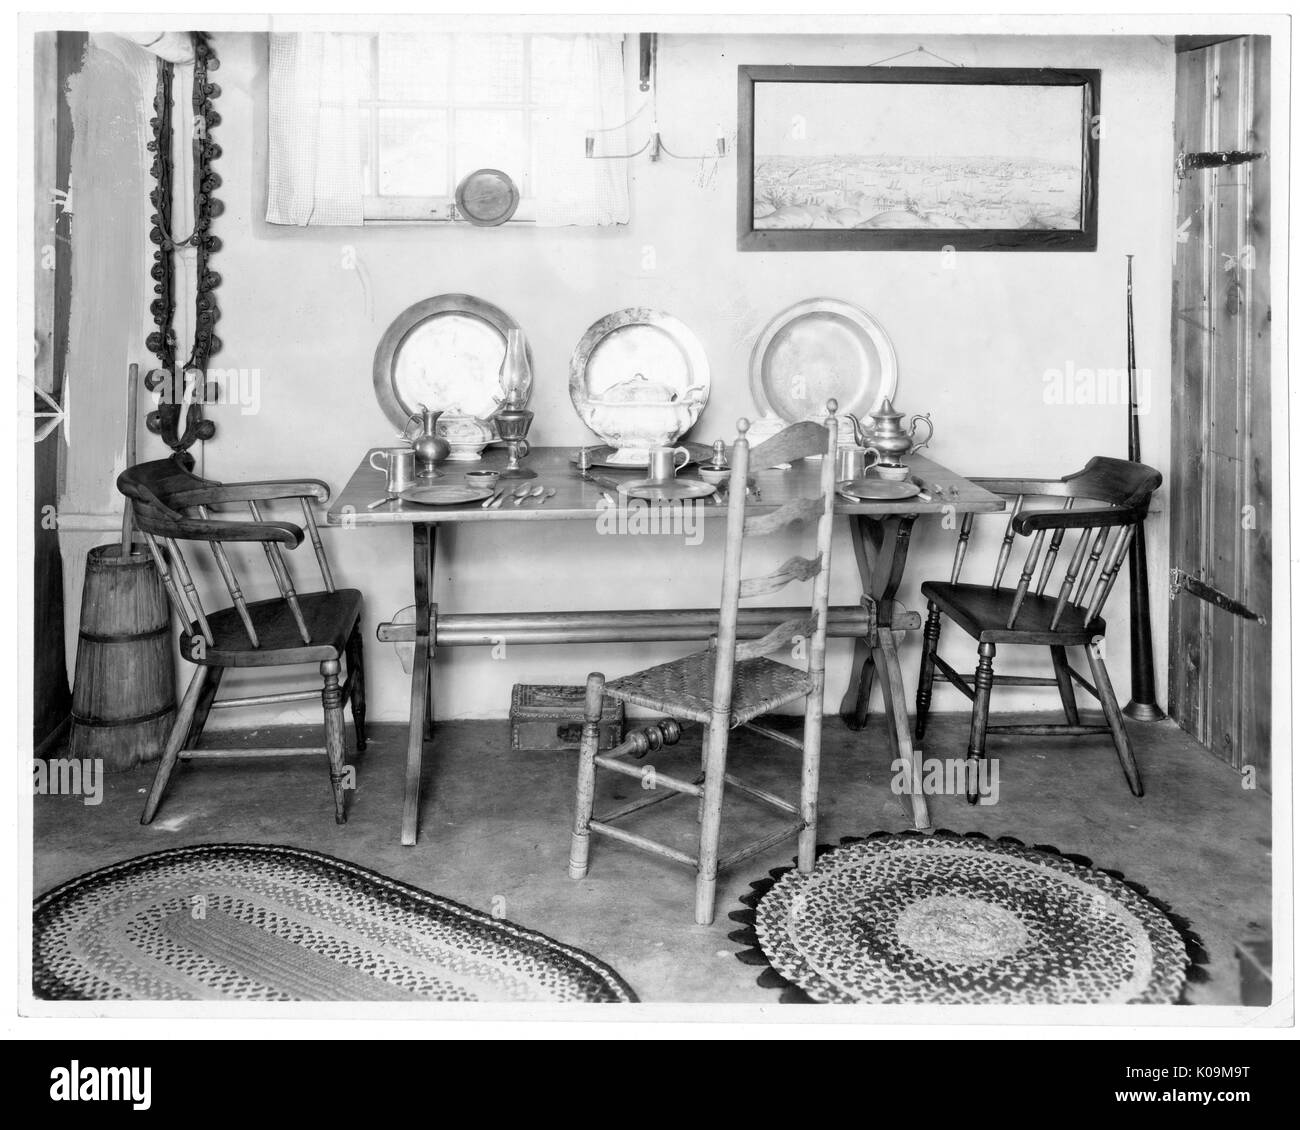 Landscape shot of a wooden table with three different types of wooden chairs; three plate a cup sets lay on the table and propped up against the wall; two different-seized patterned rugs on the ground, a landscape photo hanging on the ceiling next to a large window; Roland Park/Guilford, Baltimore, Maryland, 1910. This image is from a series documenting the construction and sale of homes in the Roland Park/Guilford neighborhood of Baltimore, a streetcar suburb and one of the first planned communities in the United States. The neighborhood was segregated, and is considered an early example of t Stock Photo